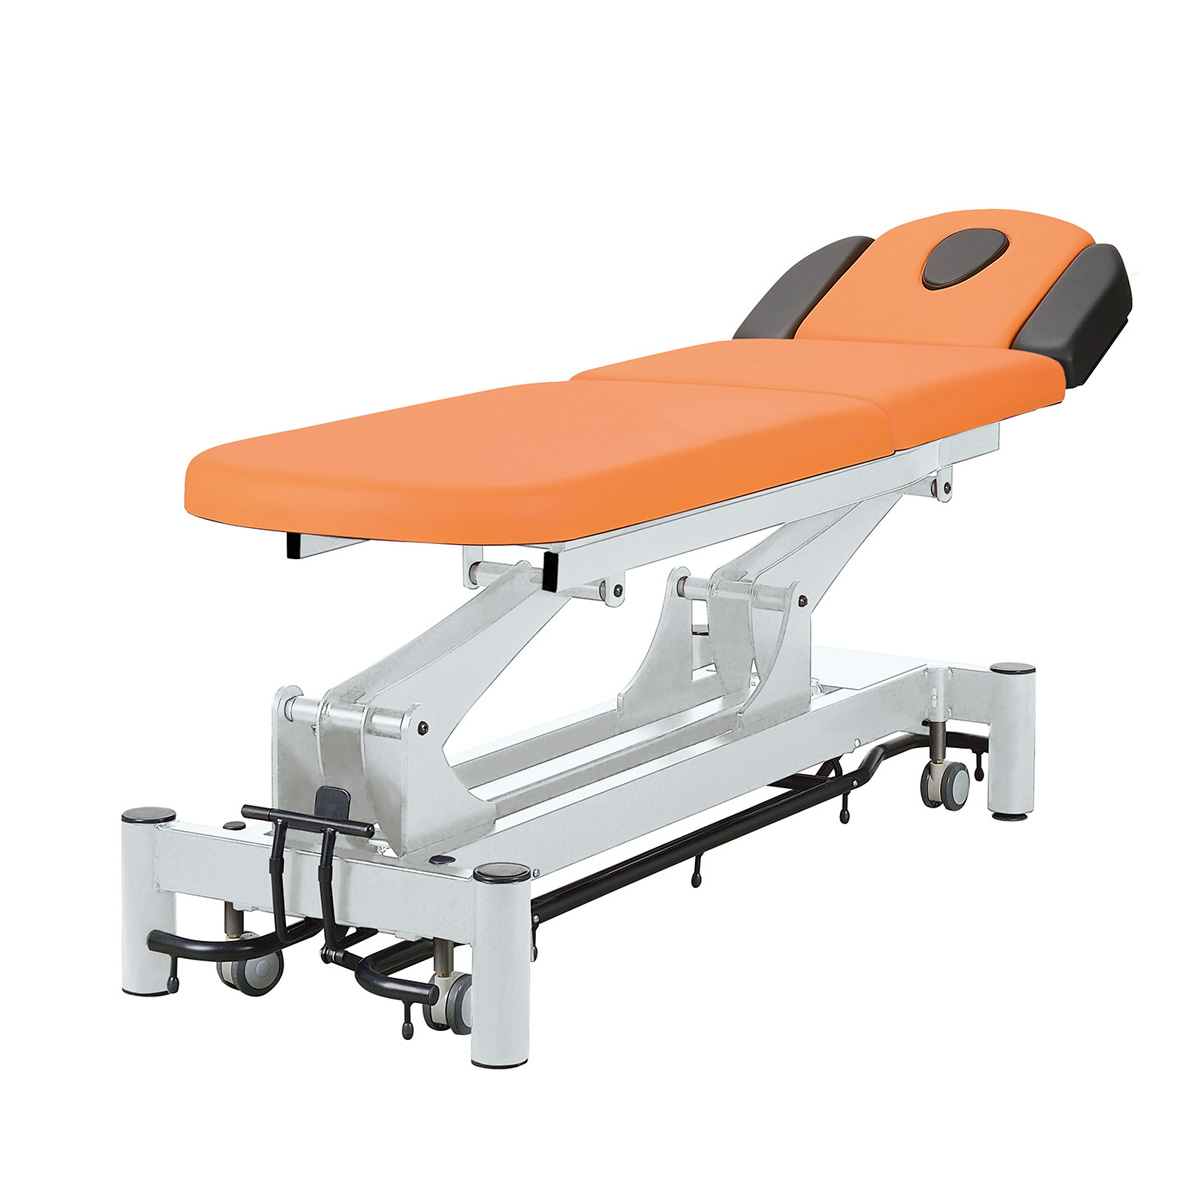 Physio/osteo table 3 sections, with face hole, all around foot controller, 4 arm supports